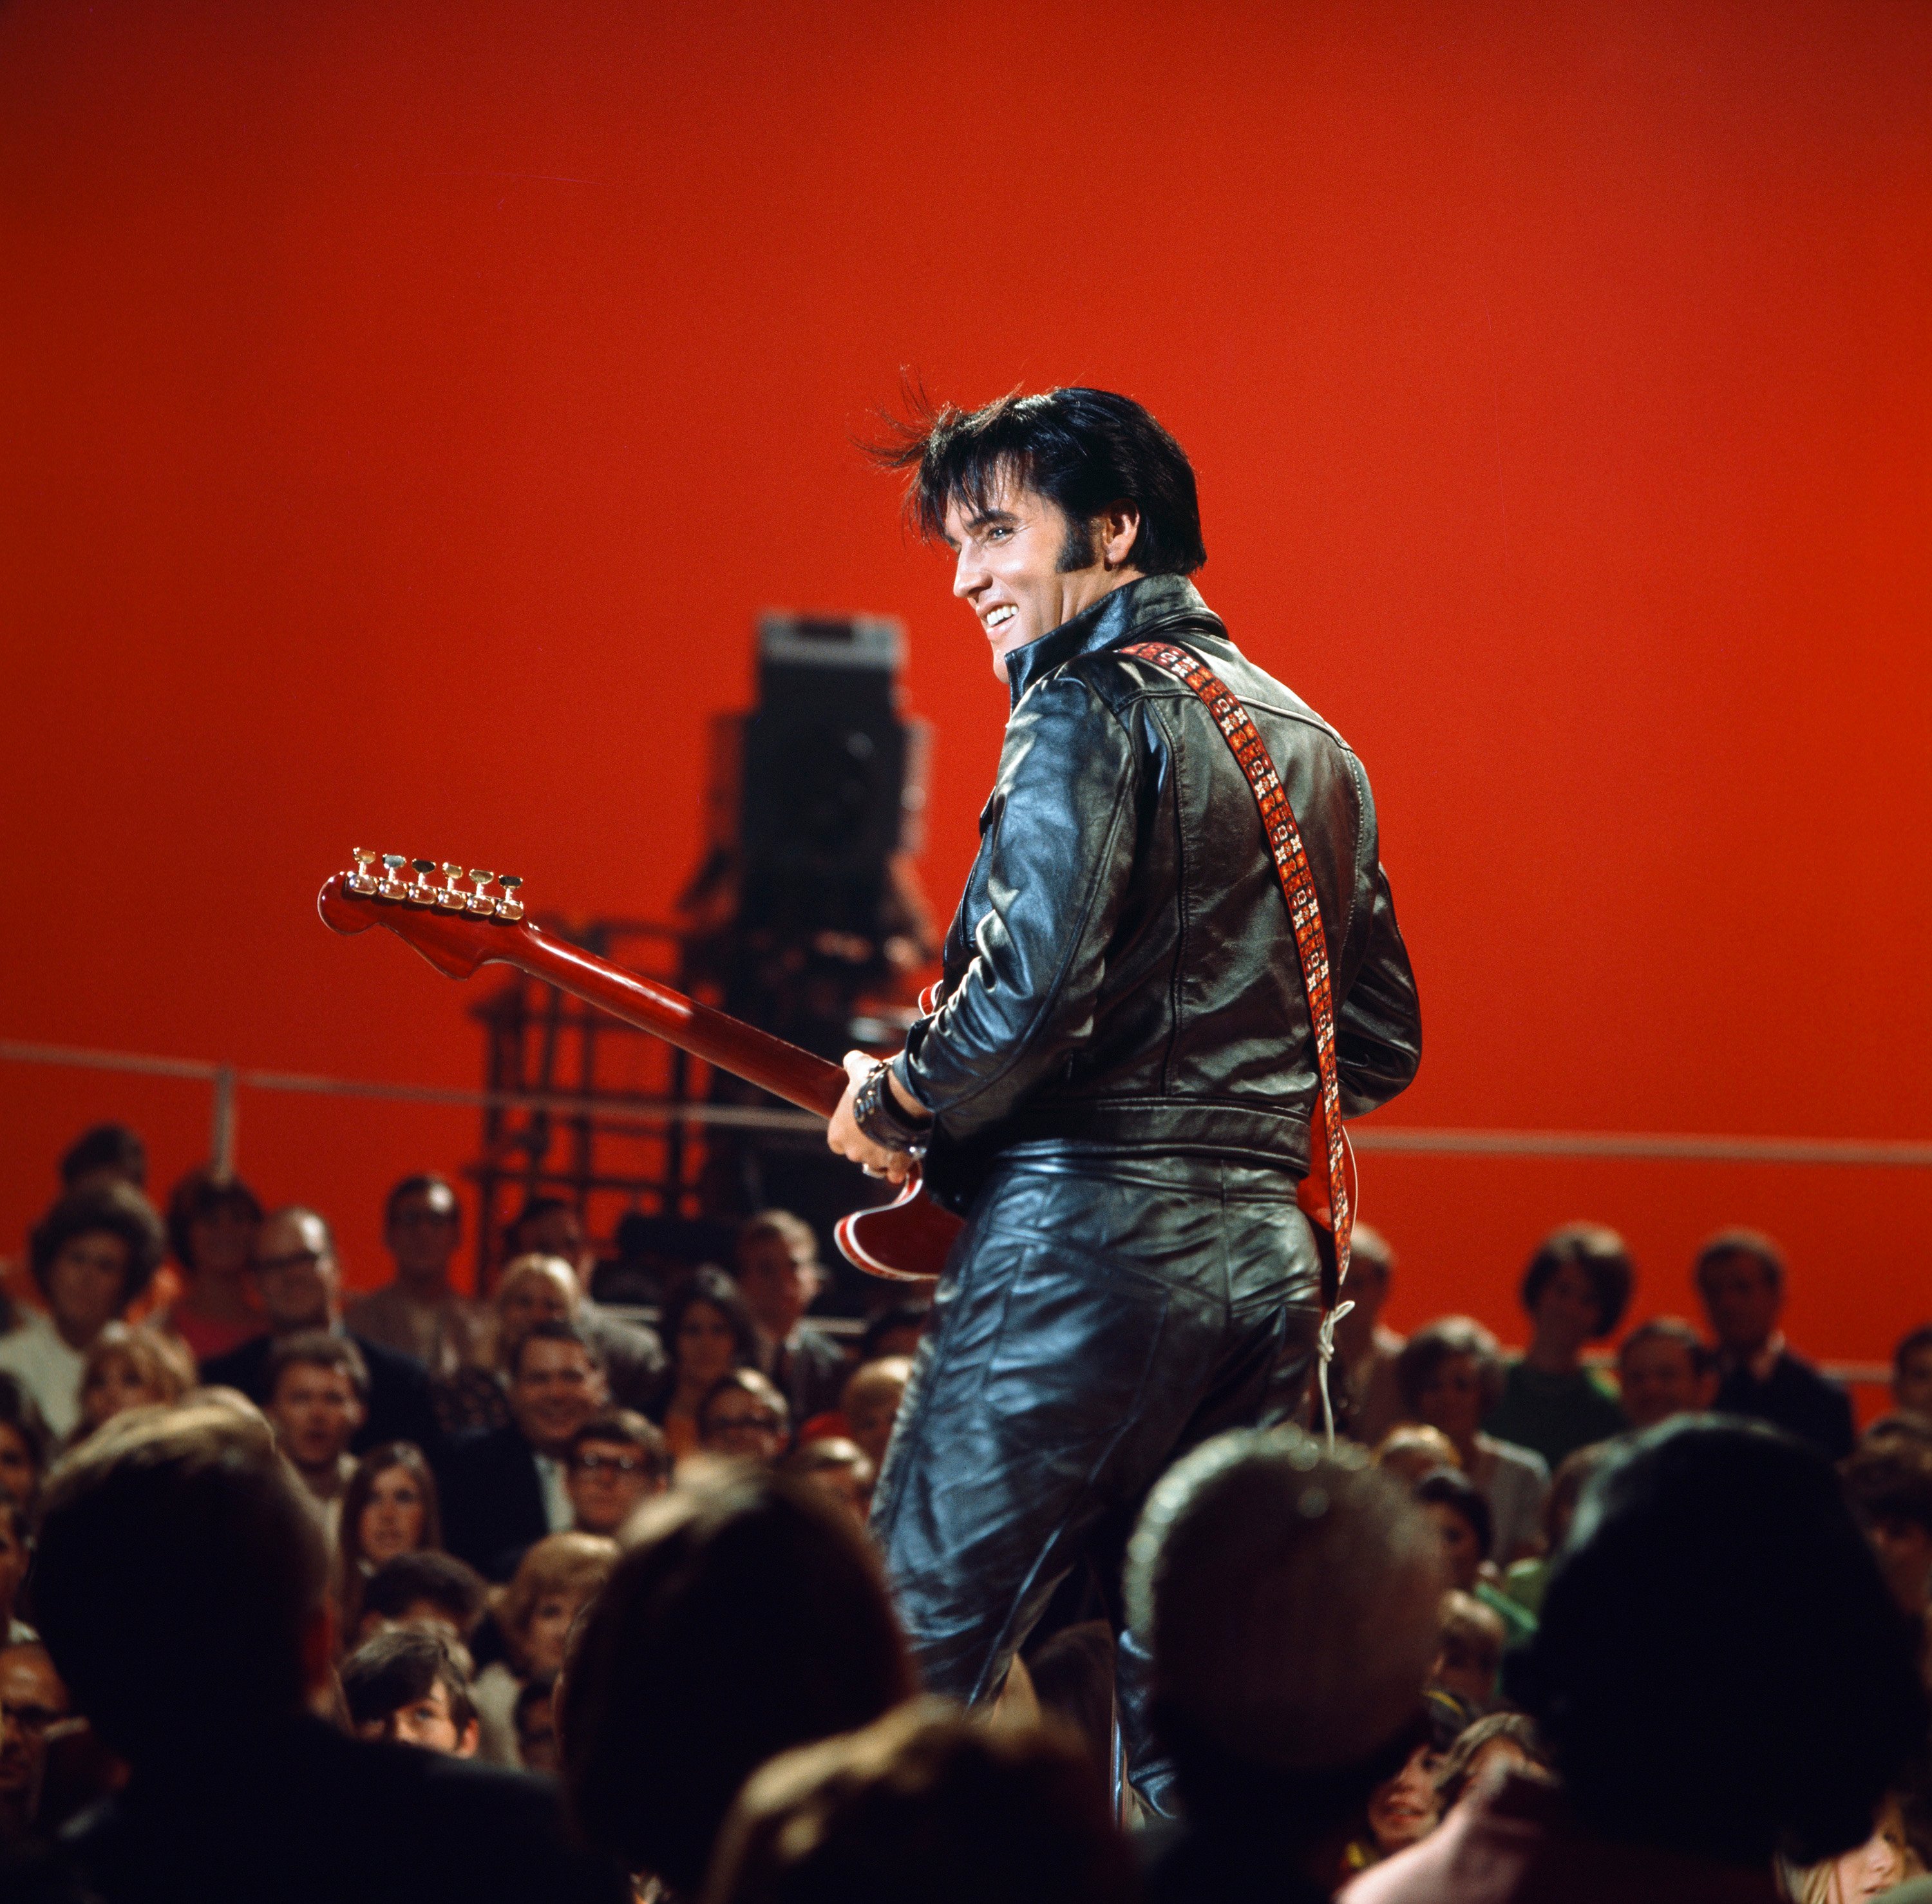 Elvis Presley performing songs in a black leather outfit